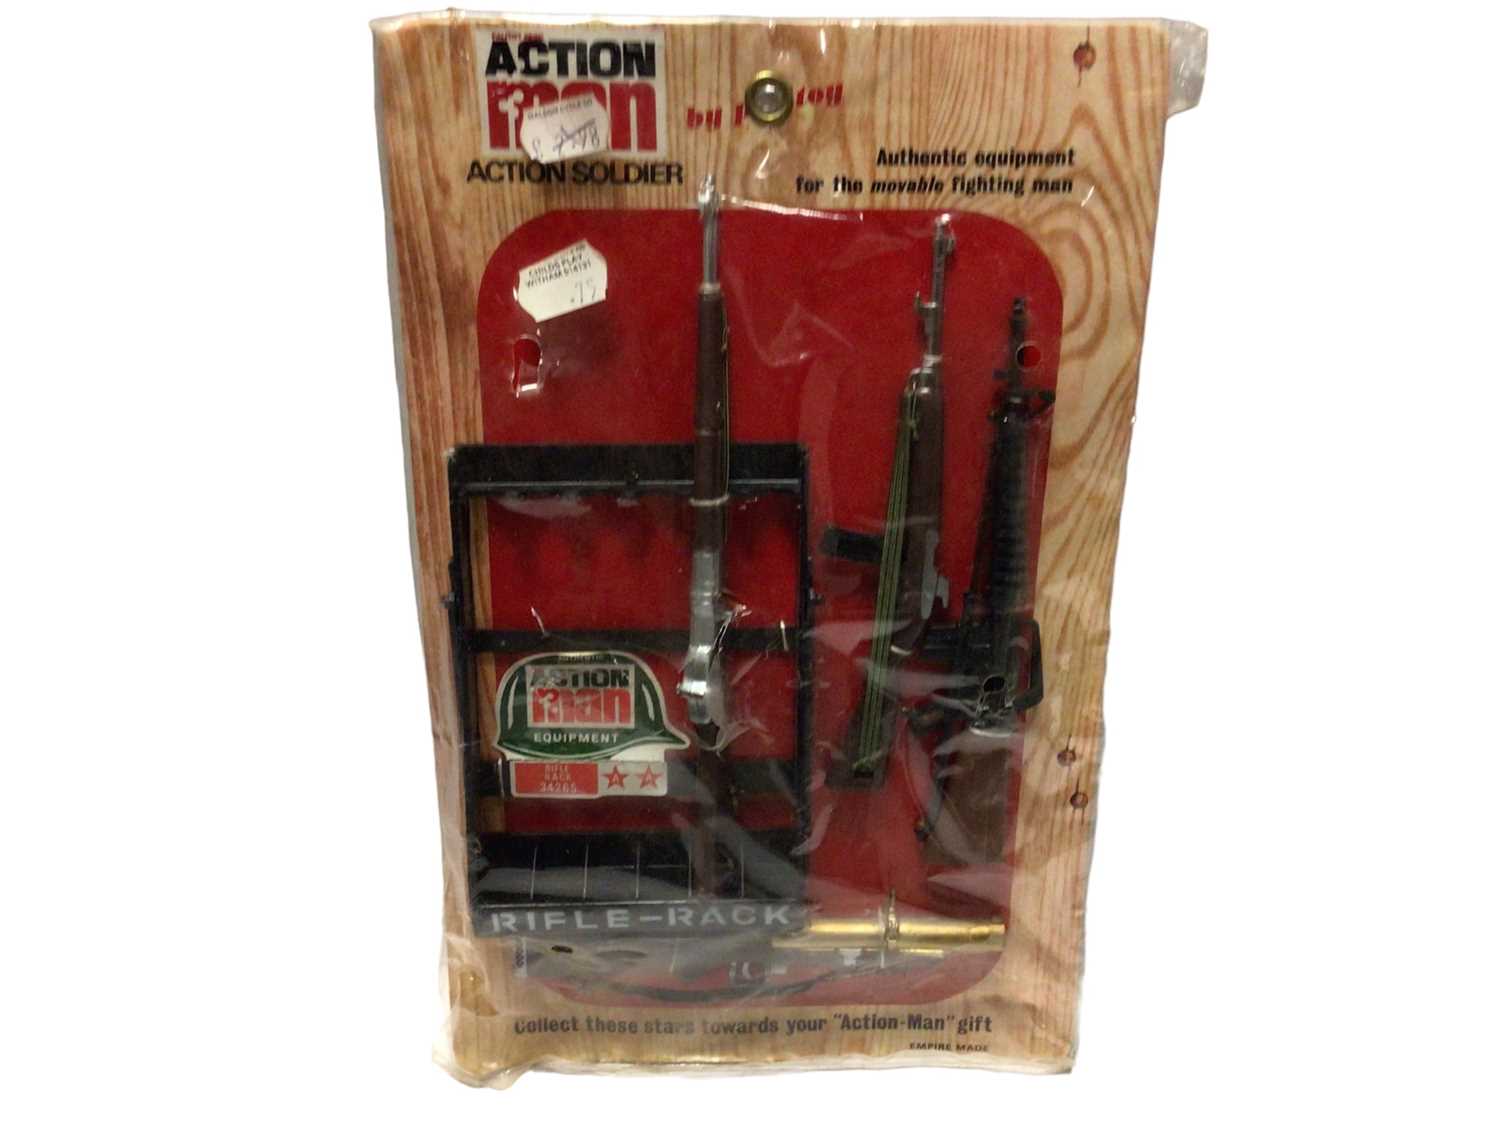 Lot 8 - Palitoy Action Man early Rifle Rack No.34265 & Camoflage Helmet, on wood frame card with cellophane outer packaging (2)